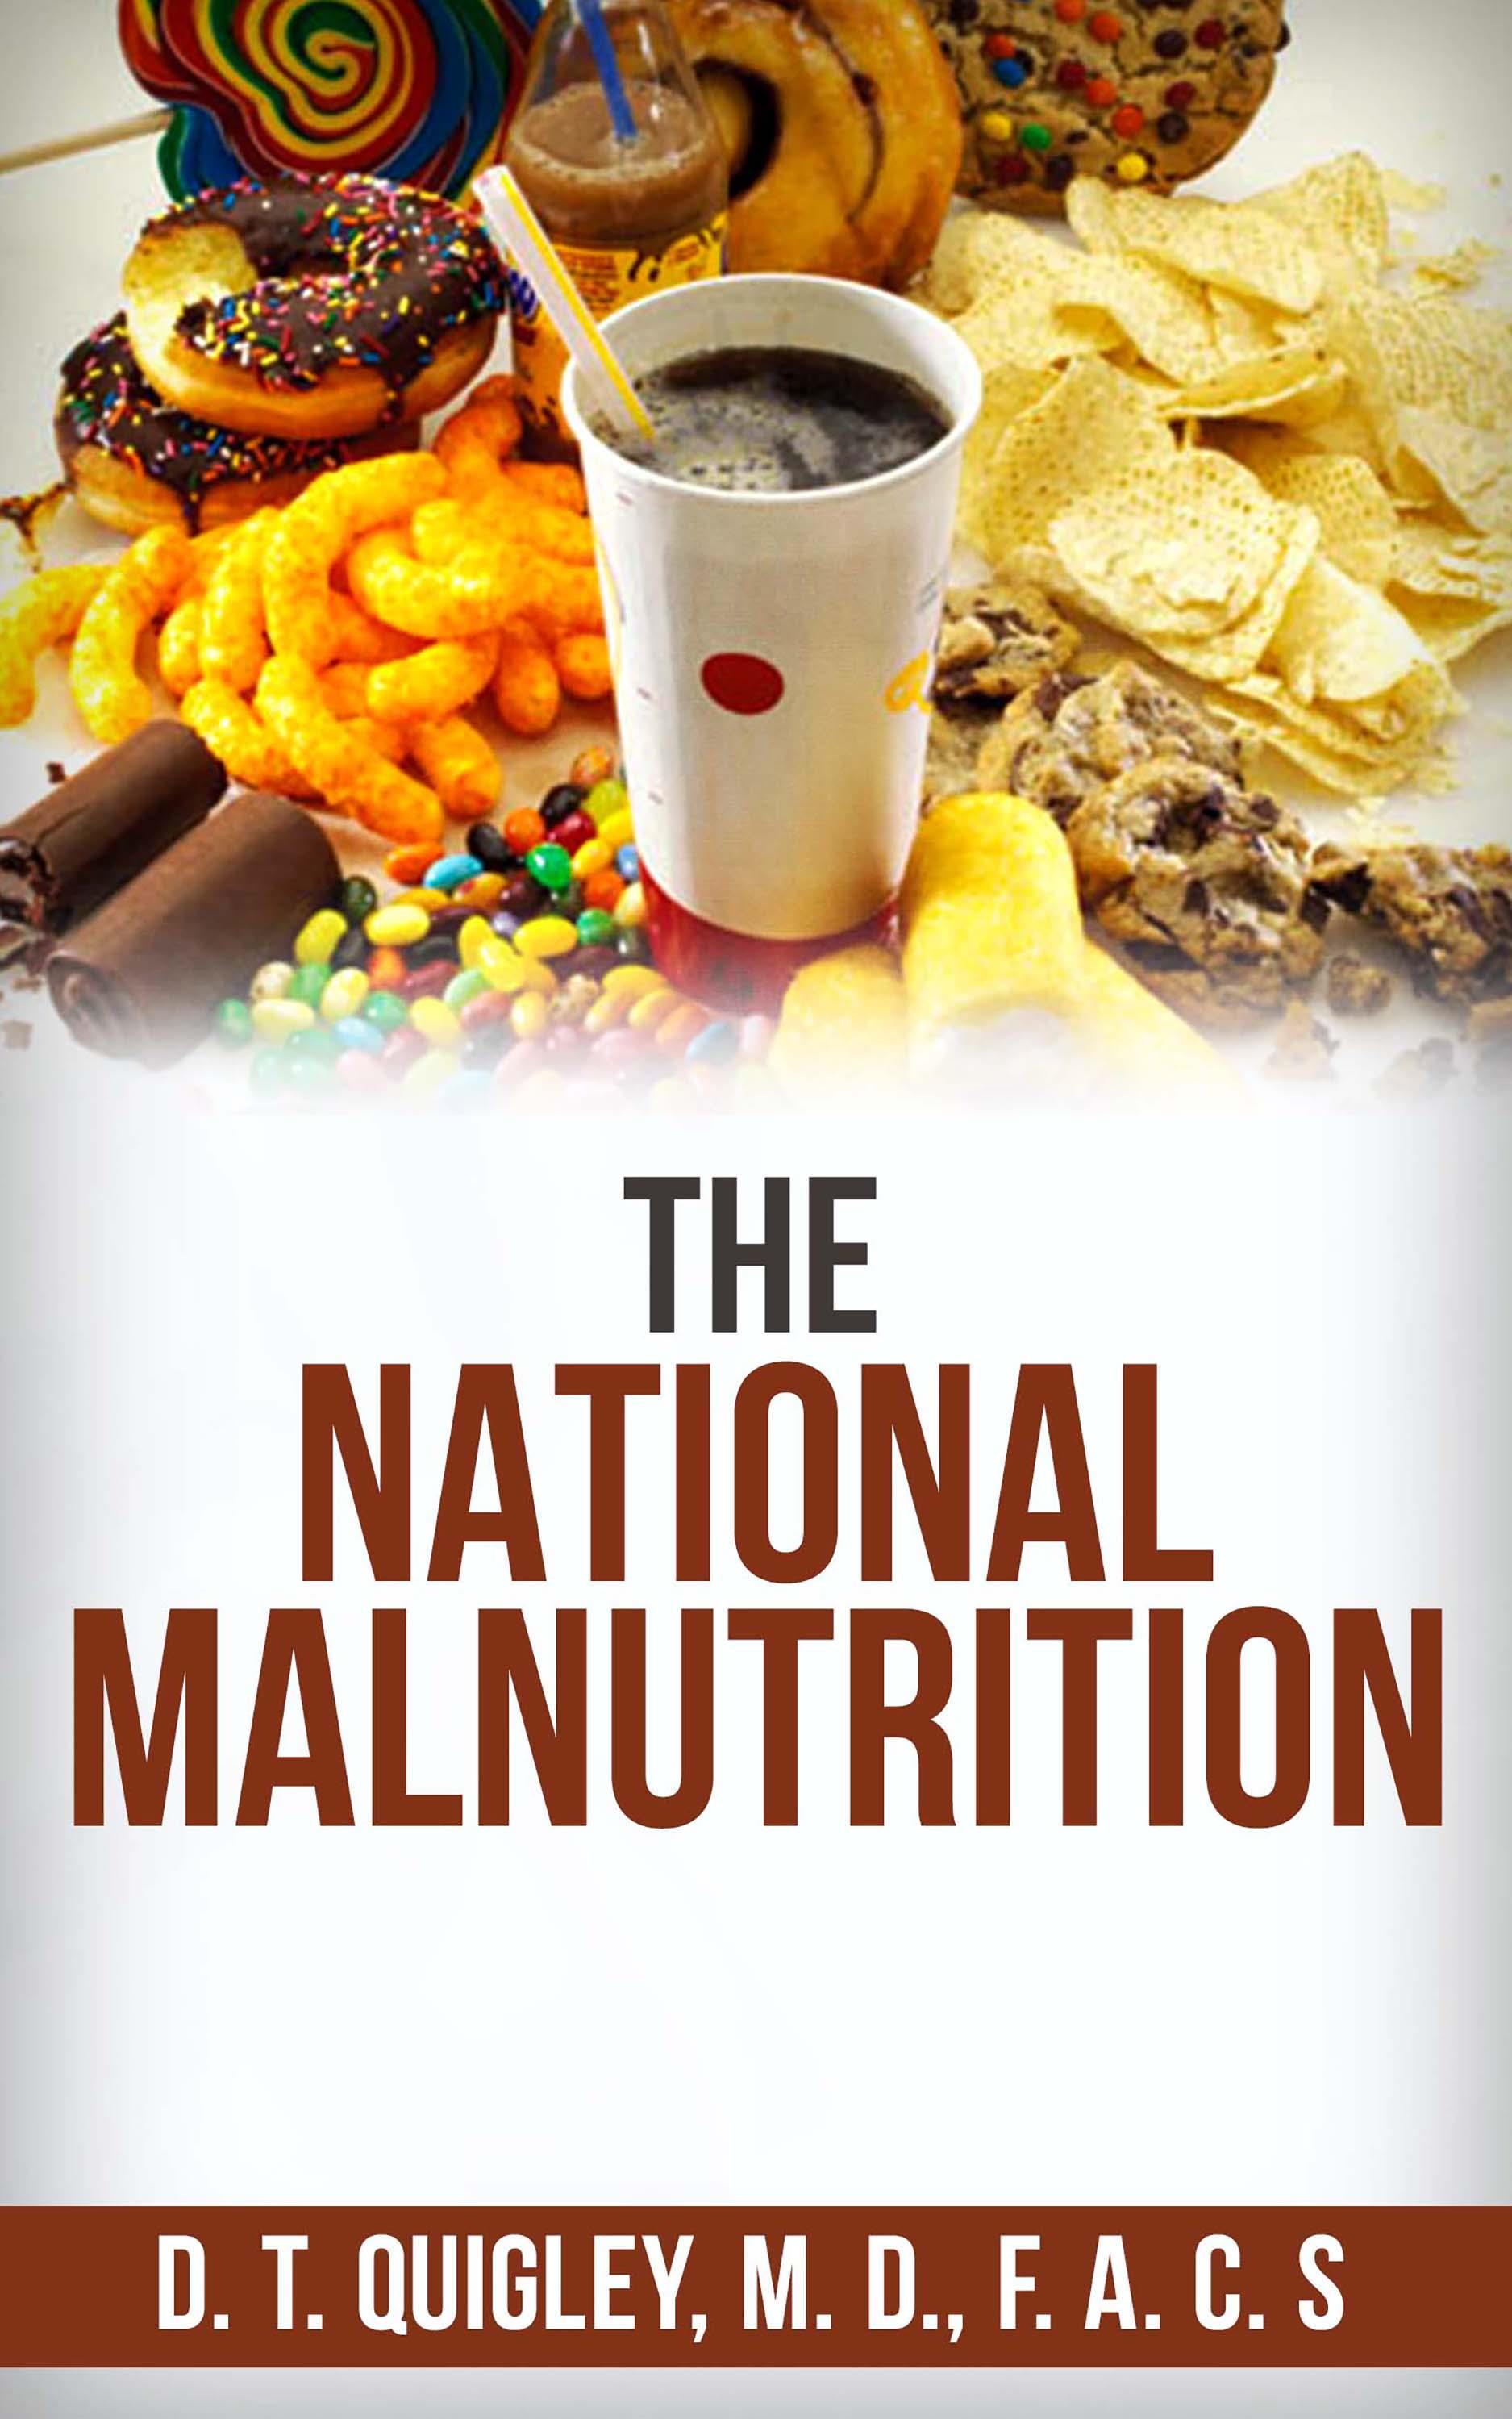 The National Malnutrition